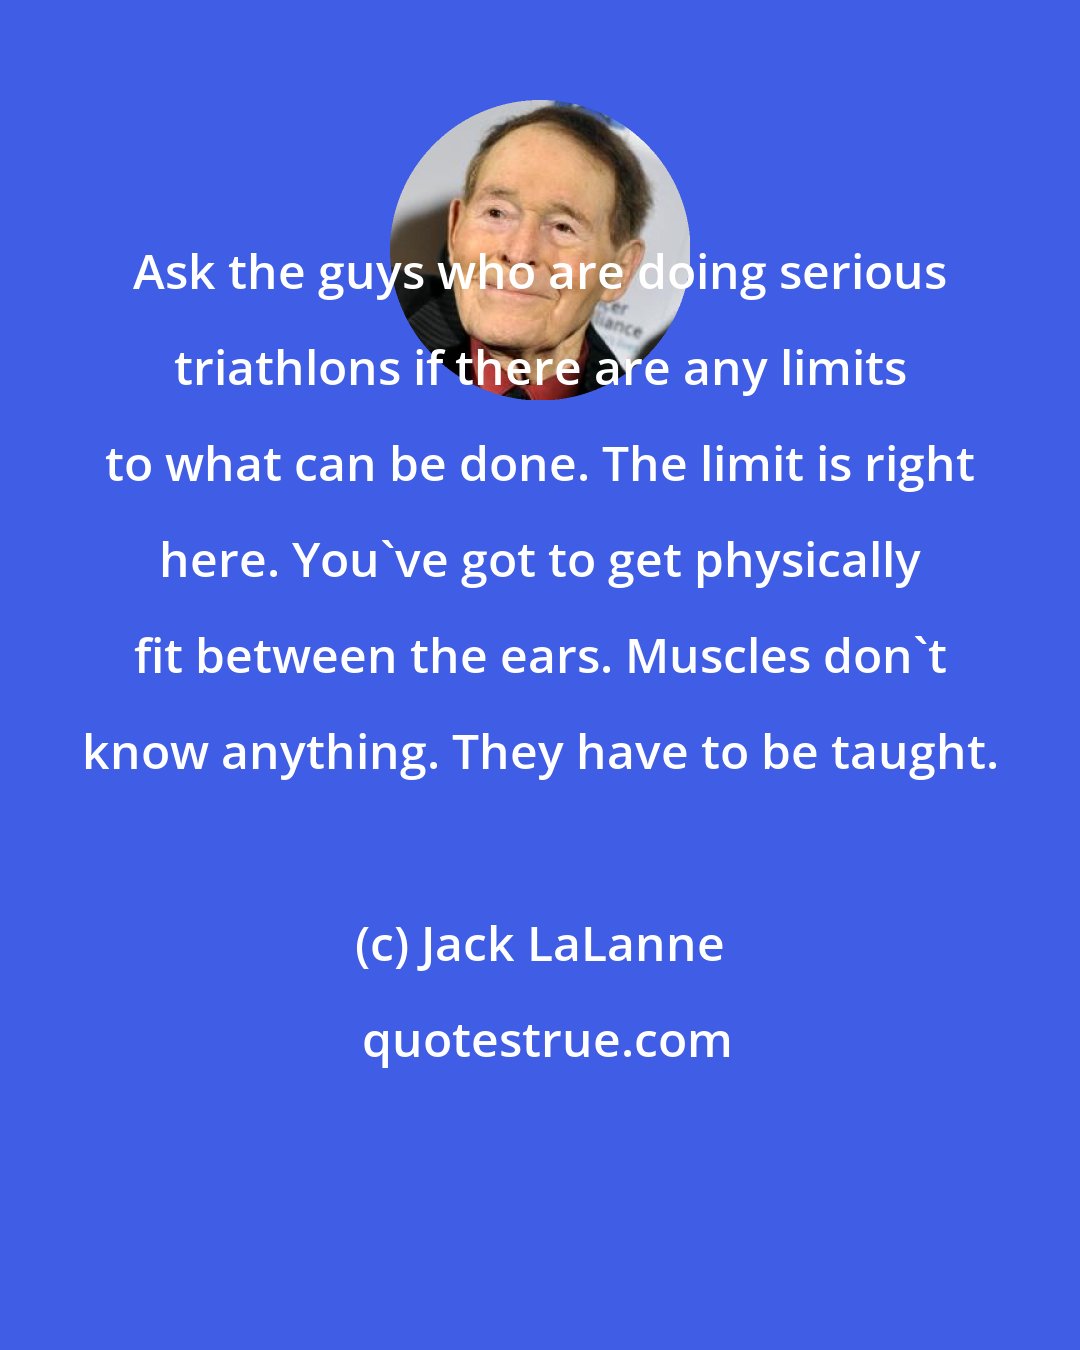 Jack LaLanne: Ask the guys who are doing serious triathlons if there are any limits to what can be done. The limit is right here. You've got to get physically fit between the ears. Muscles don't know anything. They have to be taught.